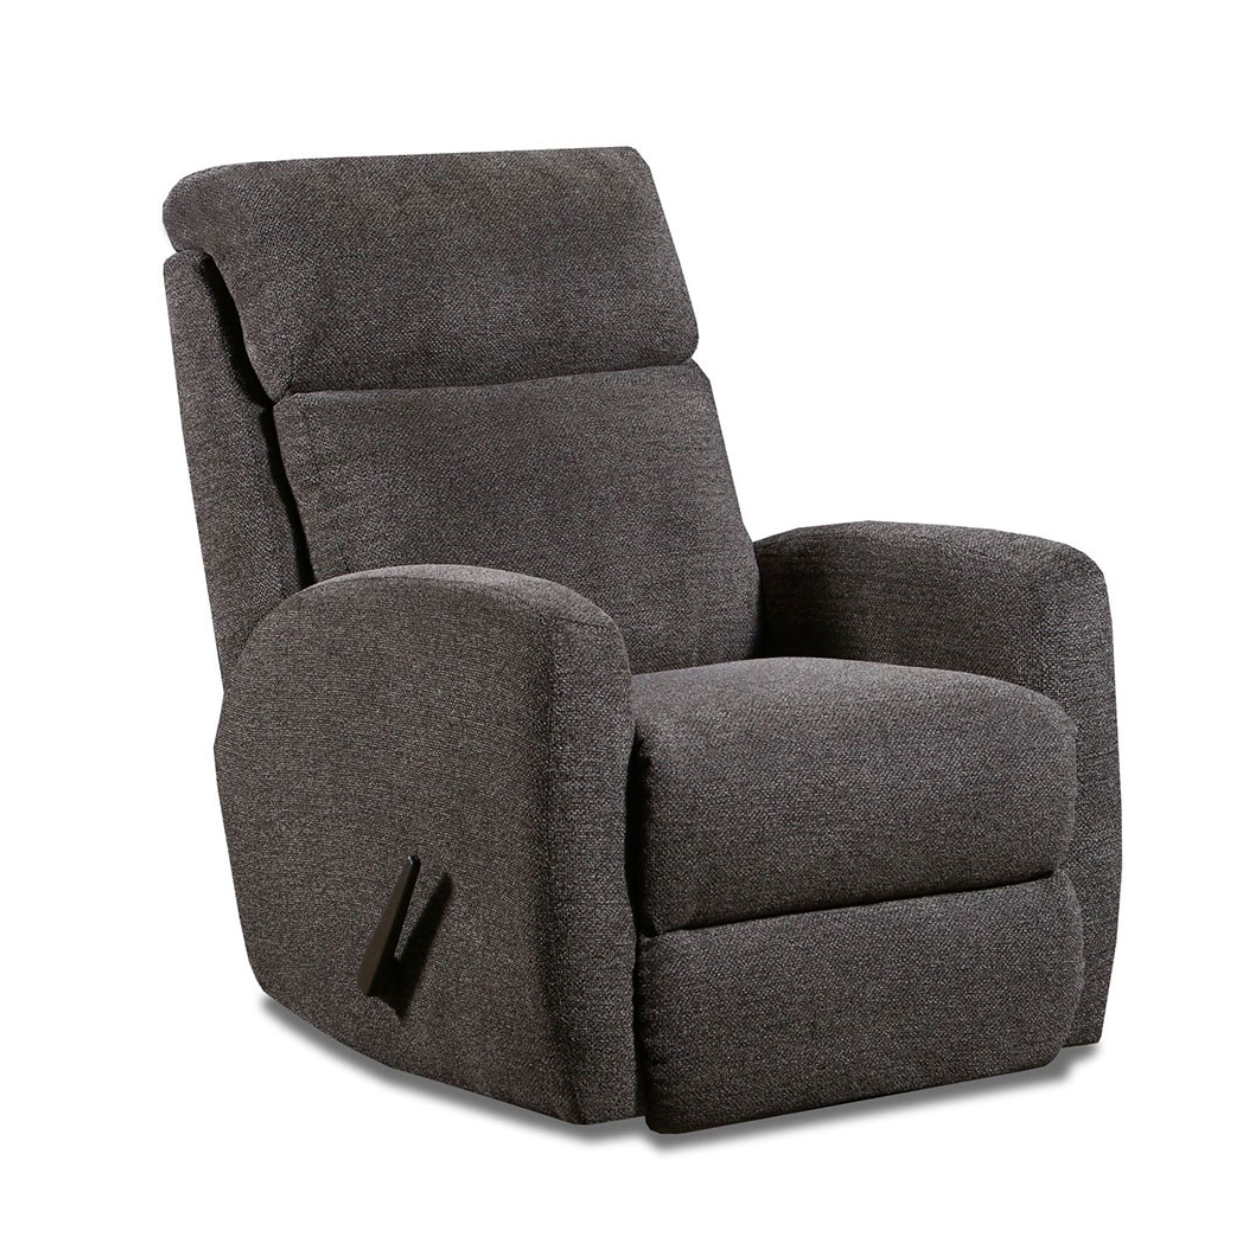 1144 Primo Lily Mink Recliner